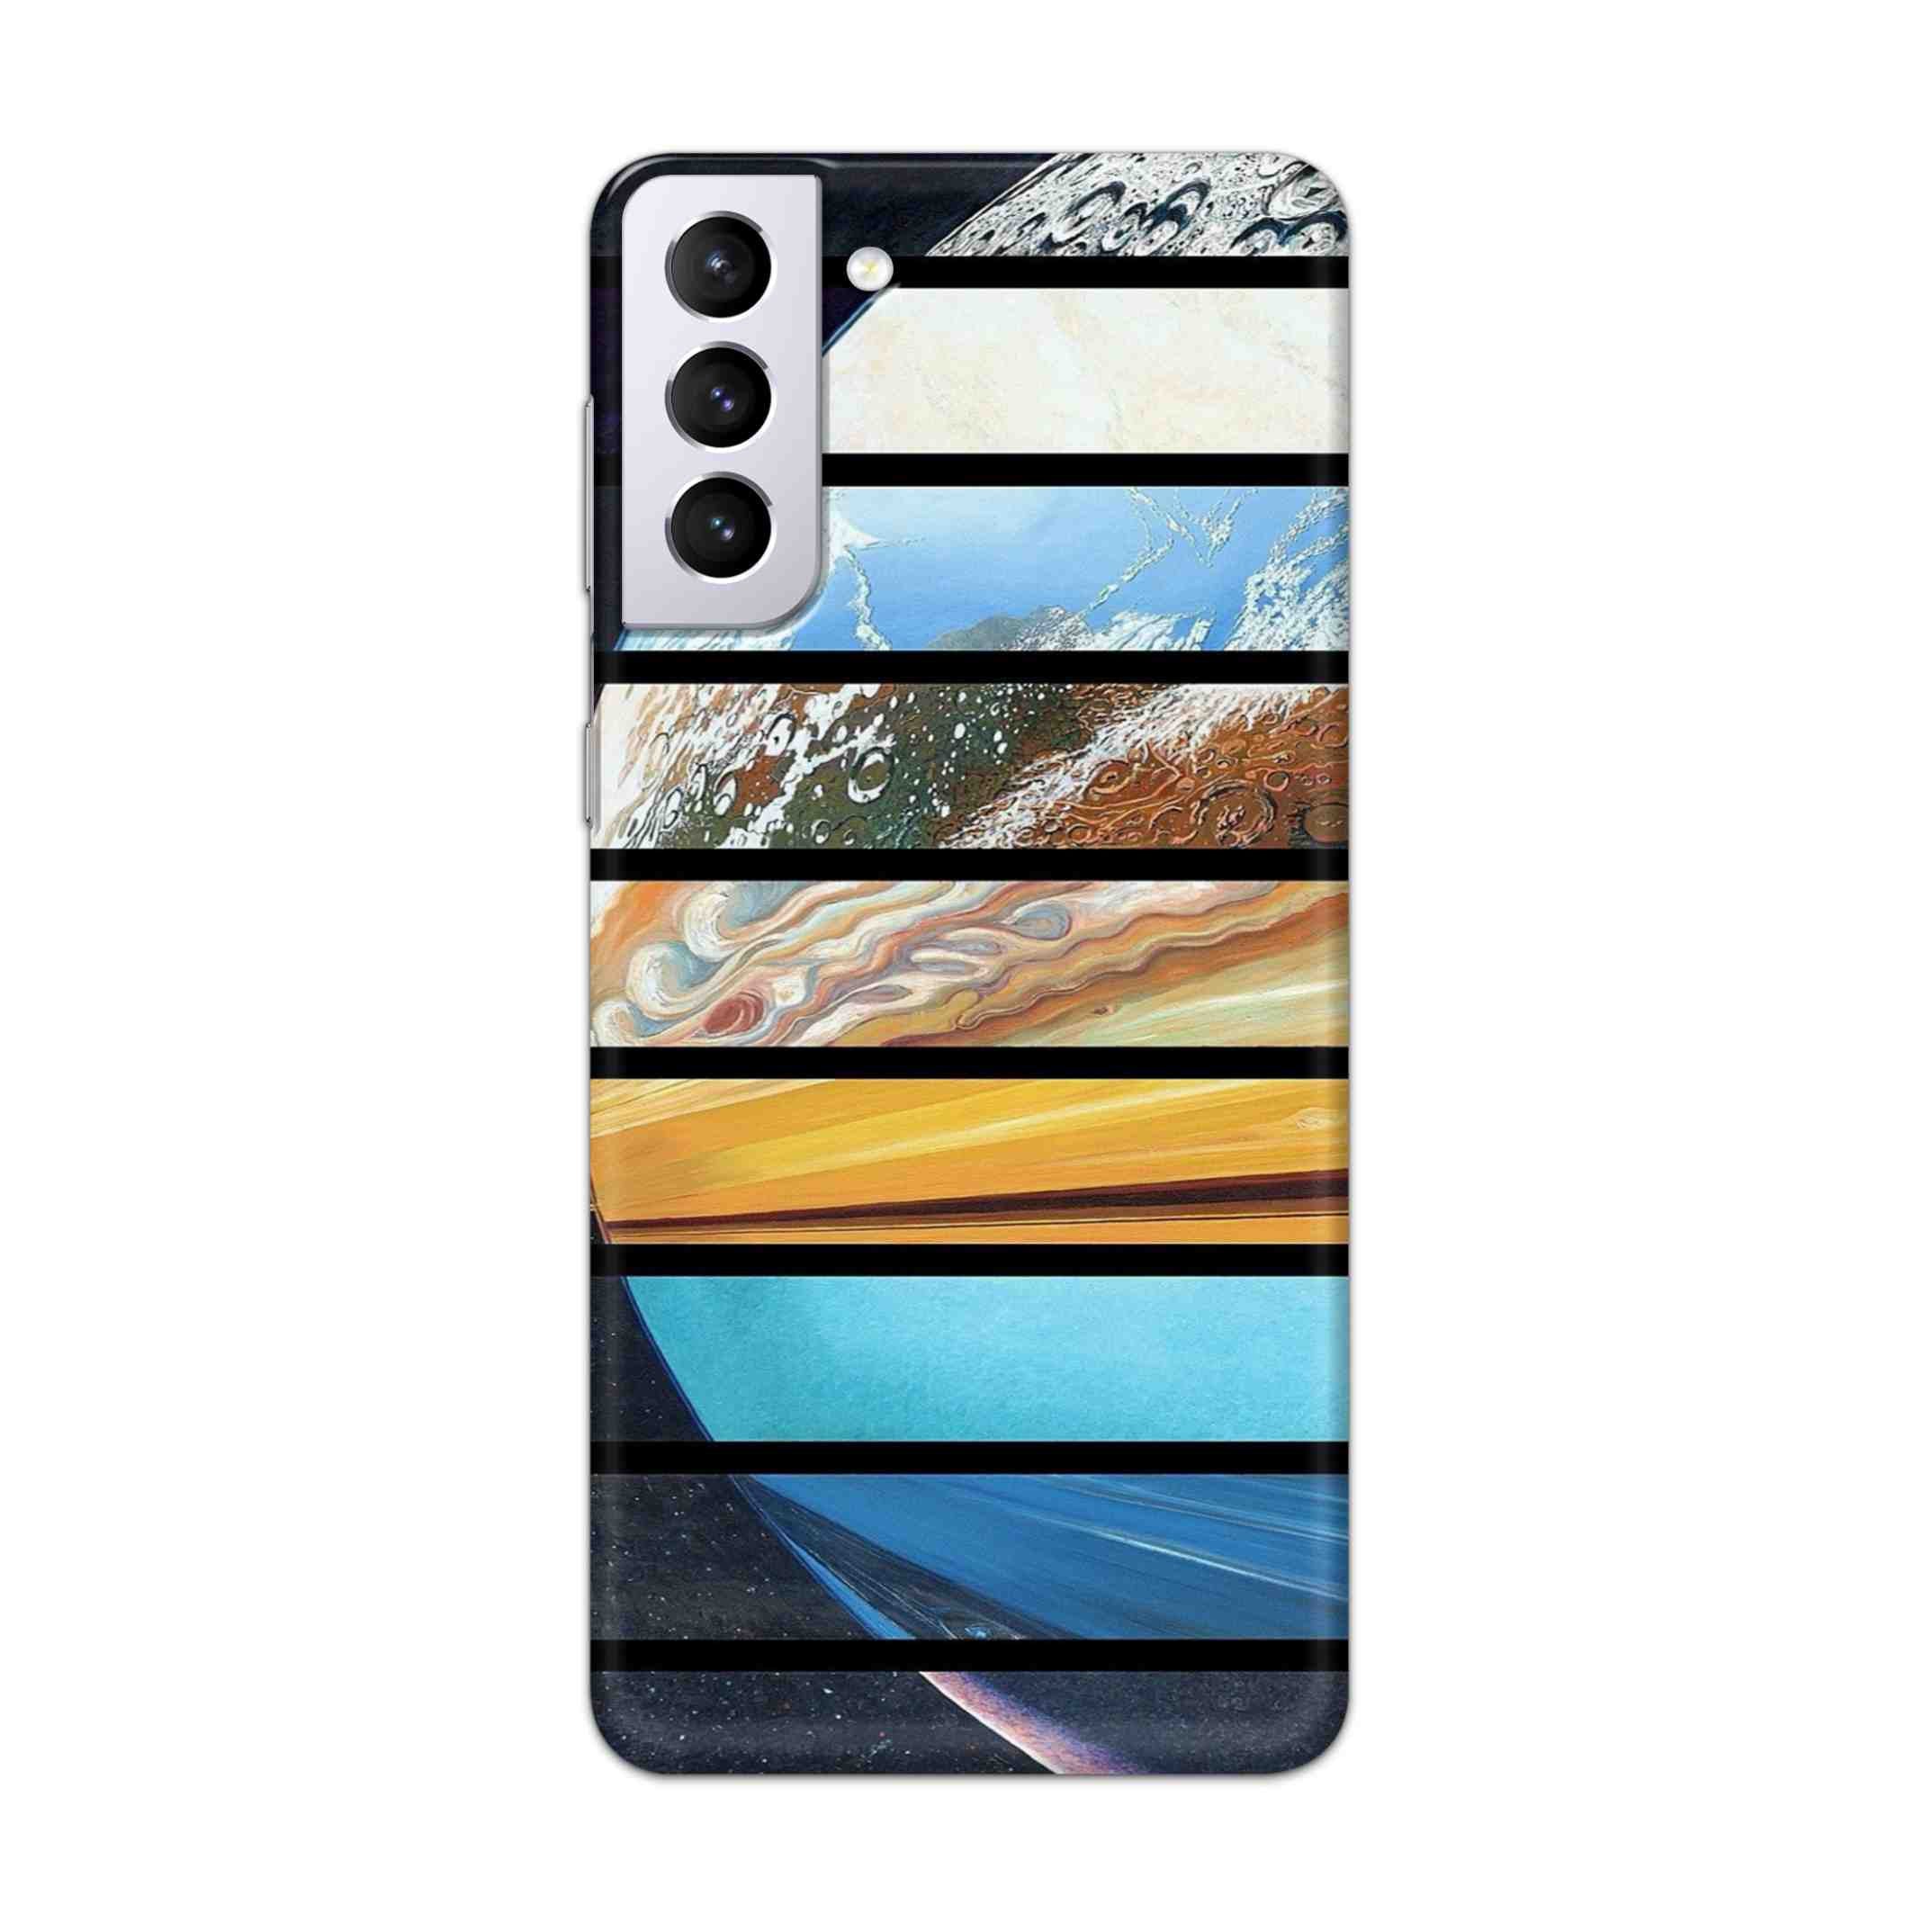 Buy Colourful Earth Hard Back Mobile Phone Case Cover For Samsung Galaxy S21 Online